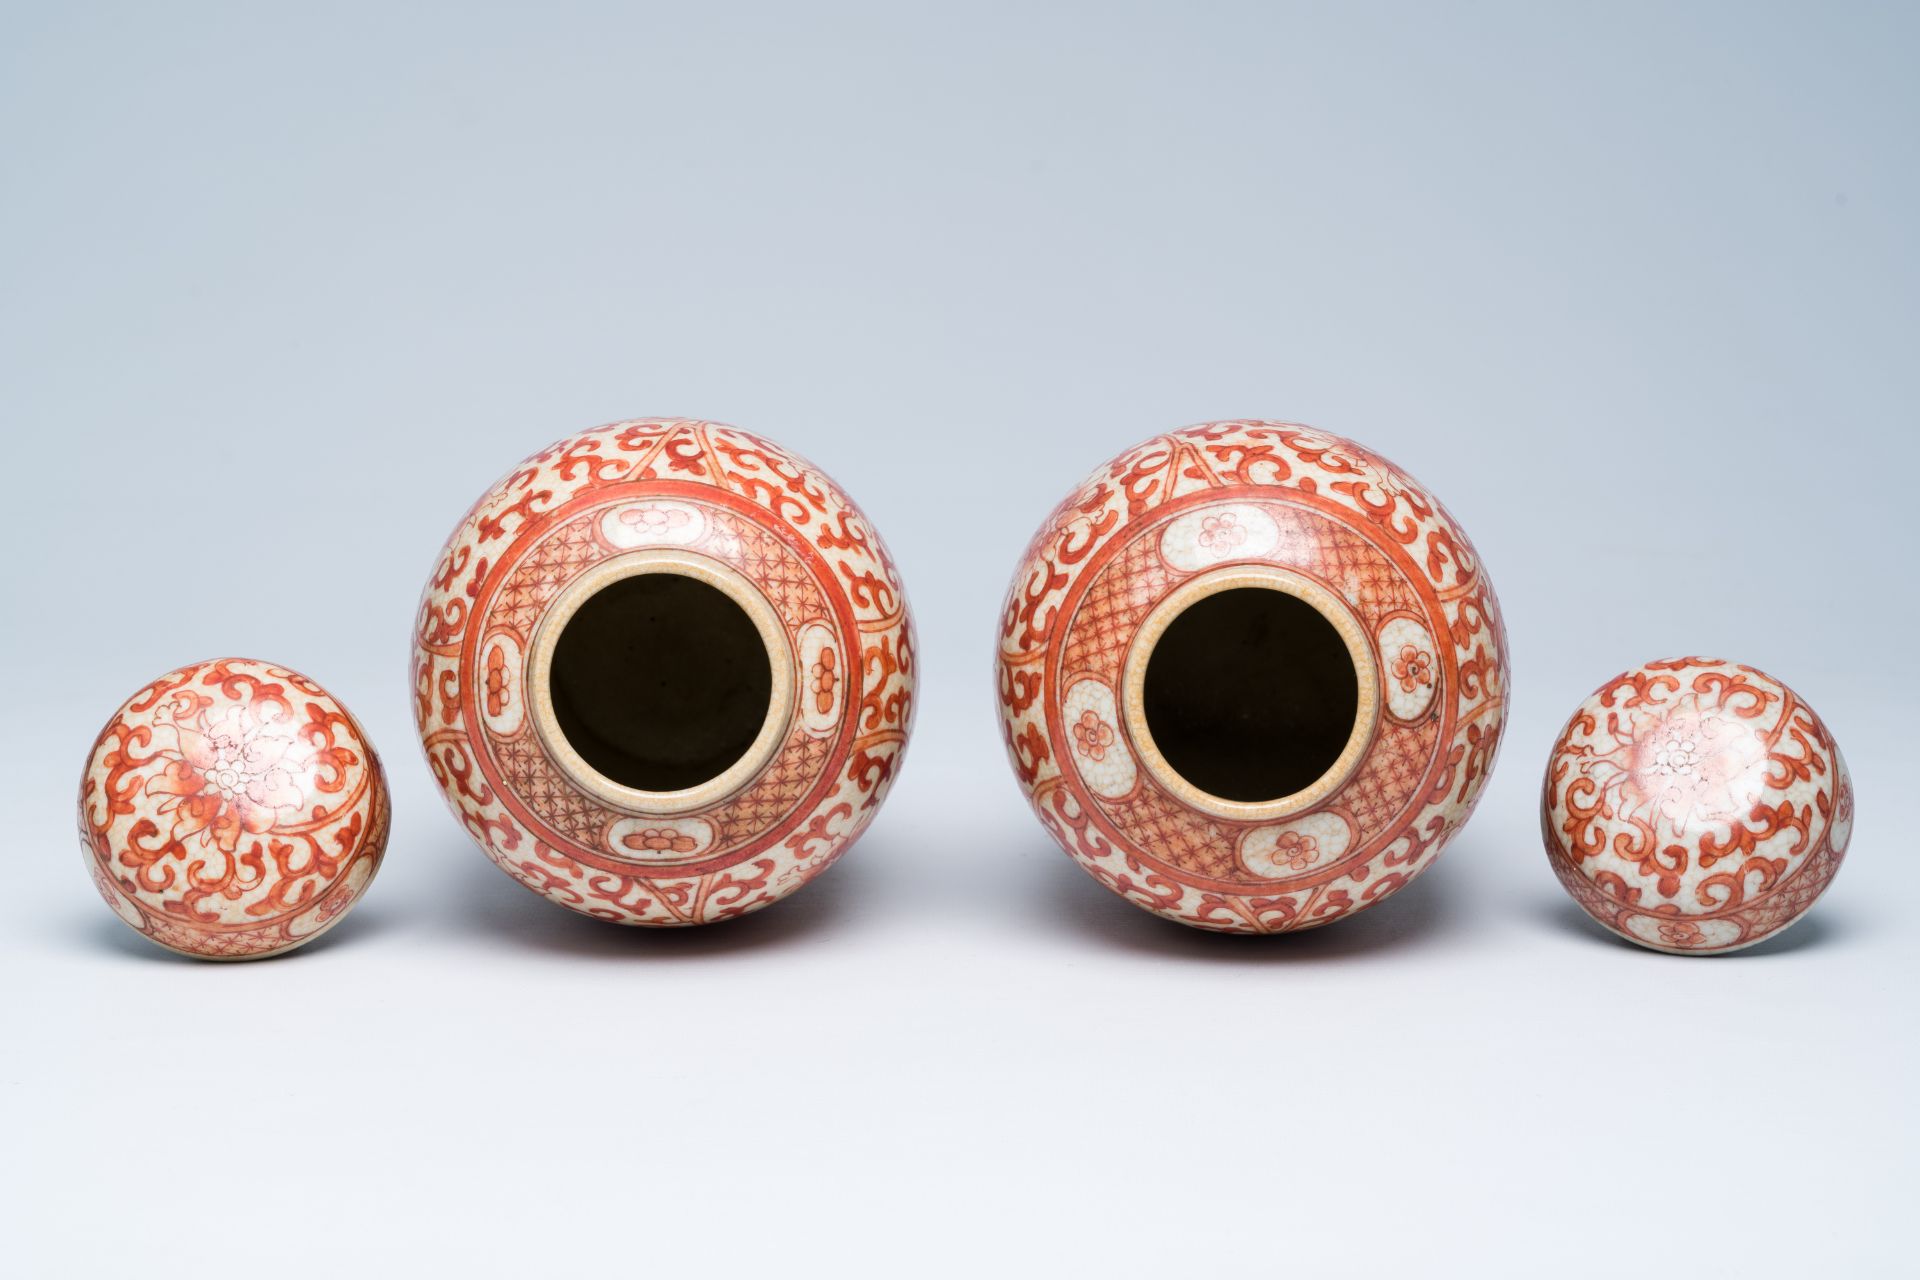 A pair of Chinese crackle glazed iron-red jars and covers with dragons among lotus scrolls, 19th C. - Image 5 of 6